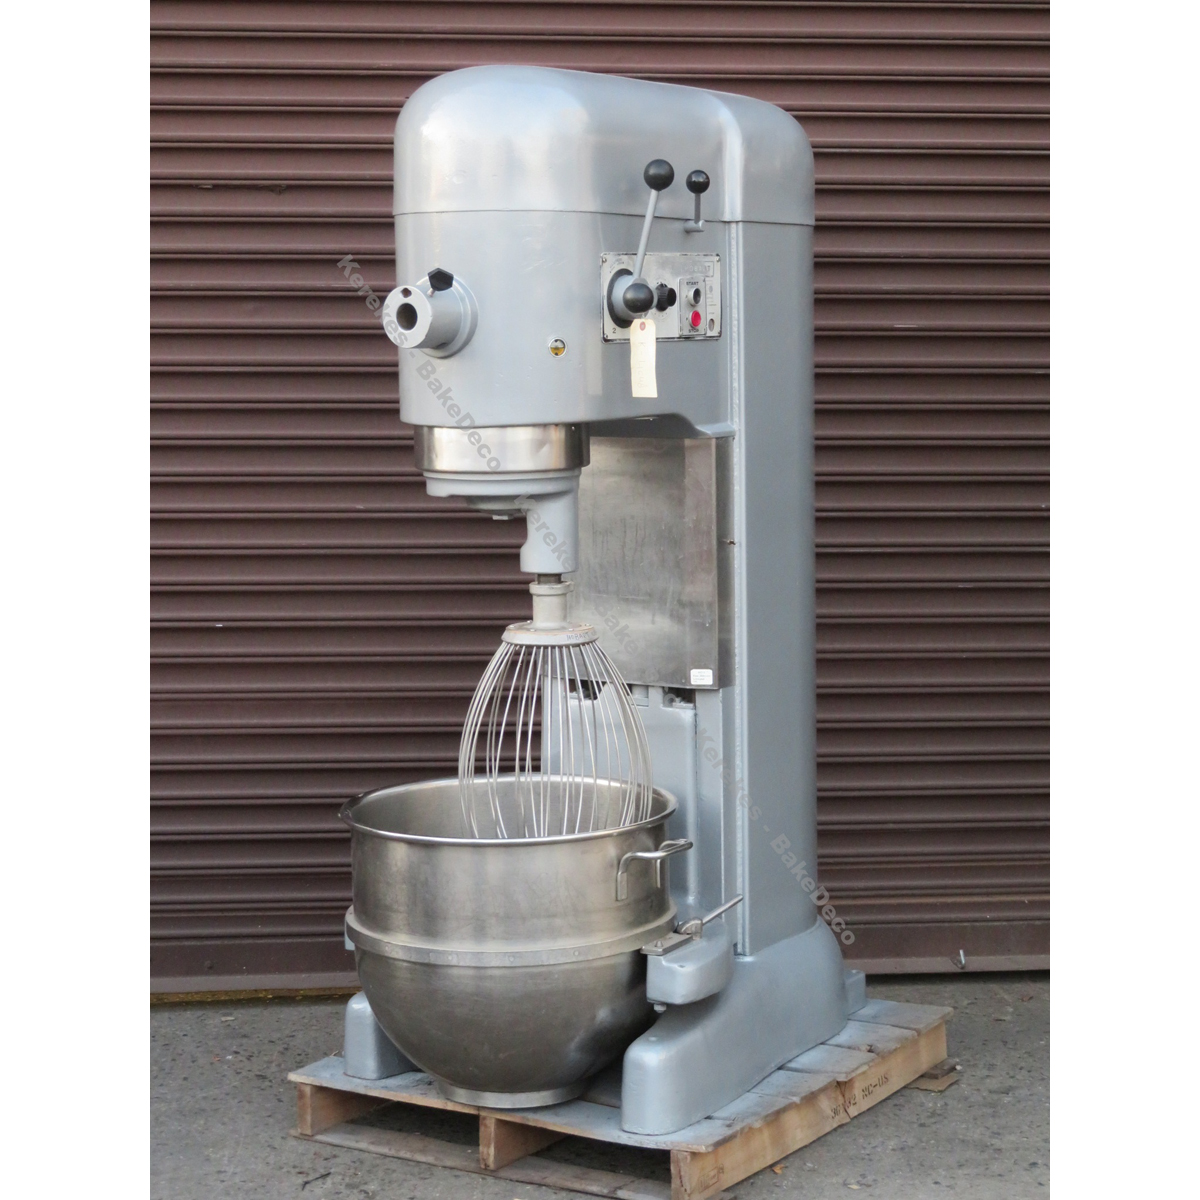 Hobart 80 Quart M802 Mixer with Attachment Hub, Single Phase, Used Excellent Condition